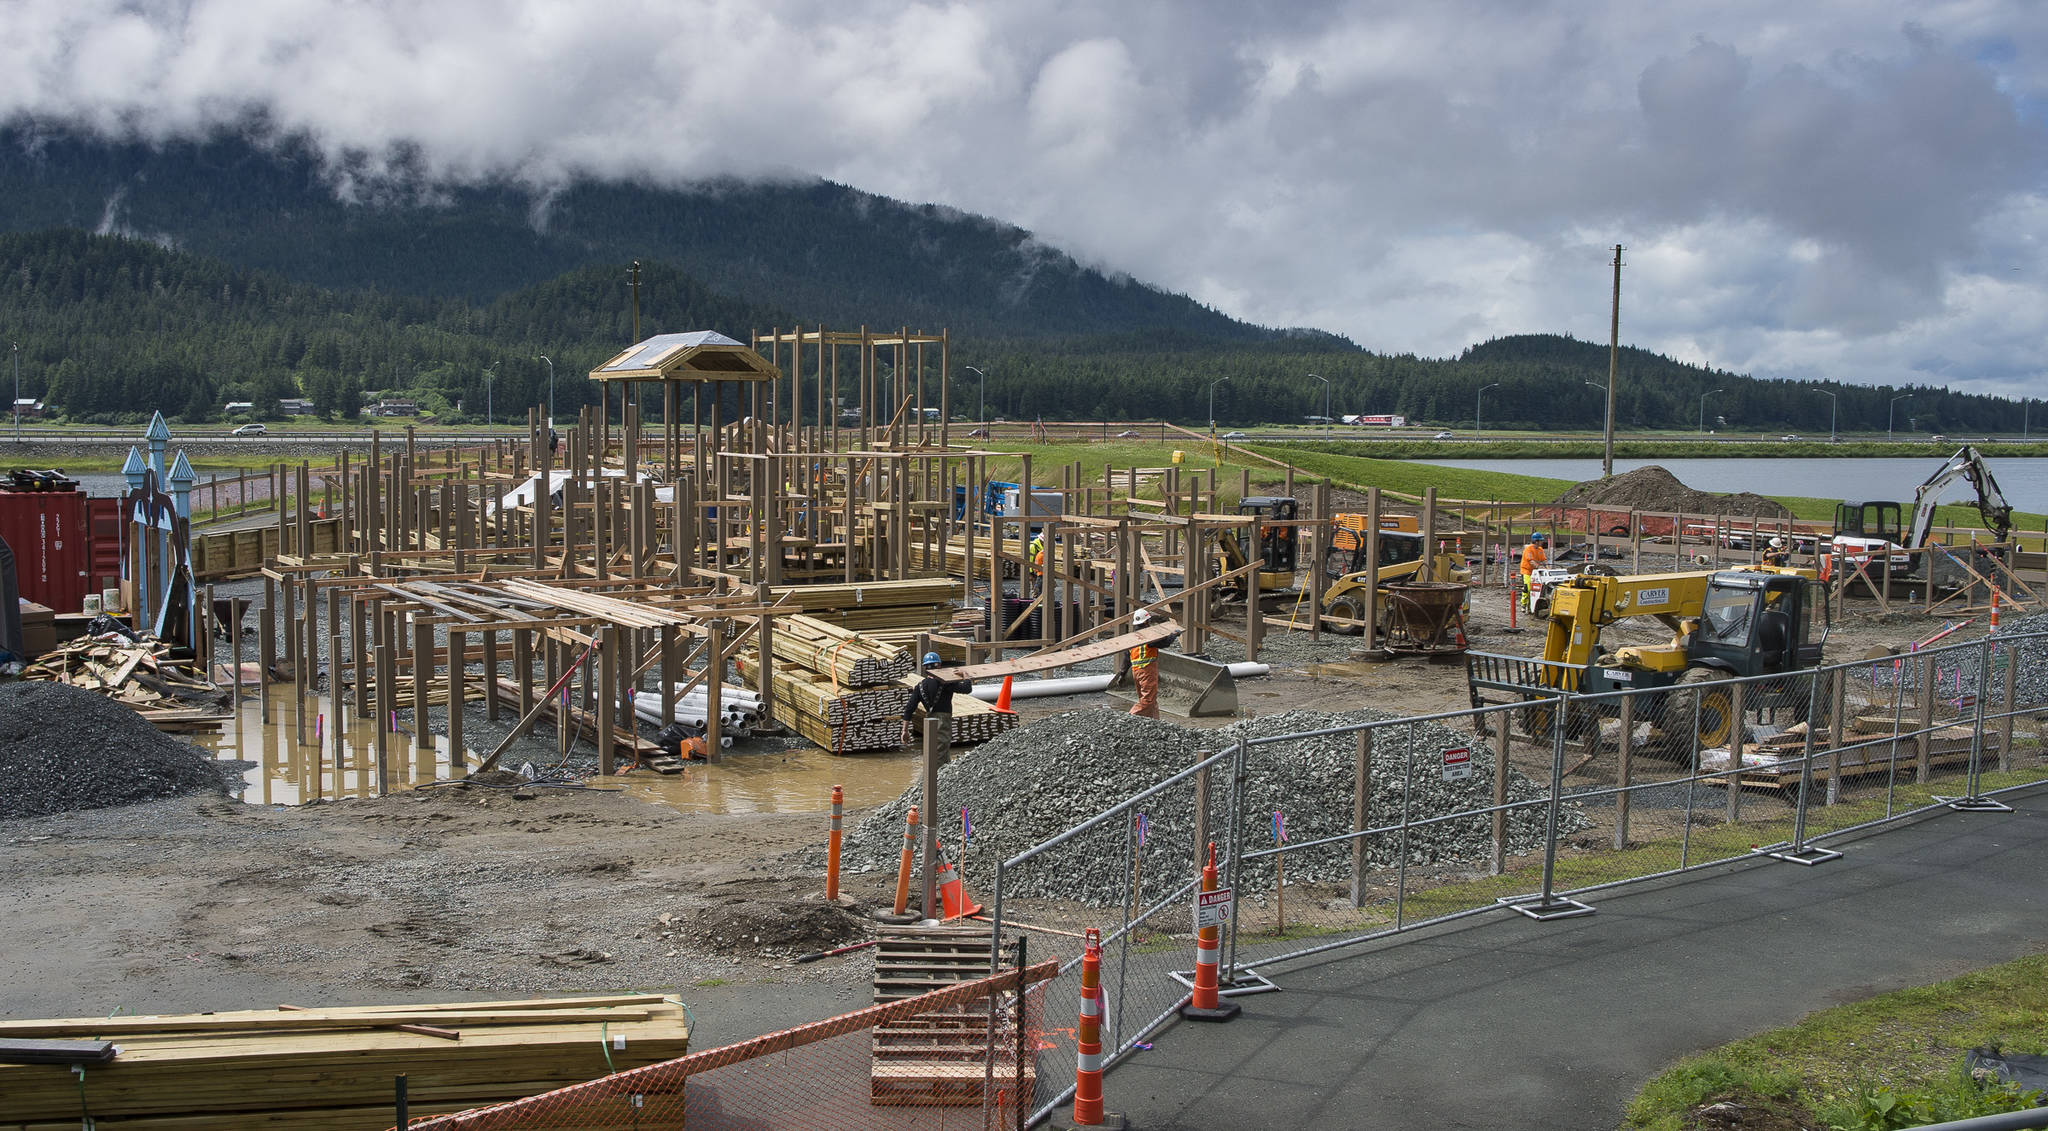 Construction crews continue the rebuilding of Project Playground at Twin Lakes on Monday, July 16, 2018. The Community portion of the build will be August 8 – 12, 2018. Built in 2007, the playground burned down in 2017. (Michael Penn | Juneau Empire)